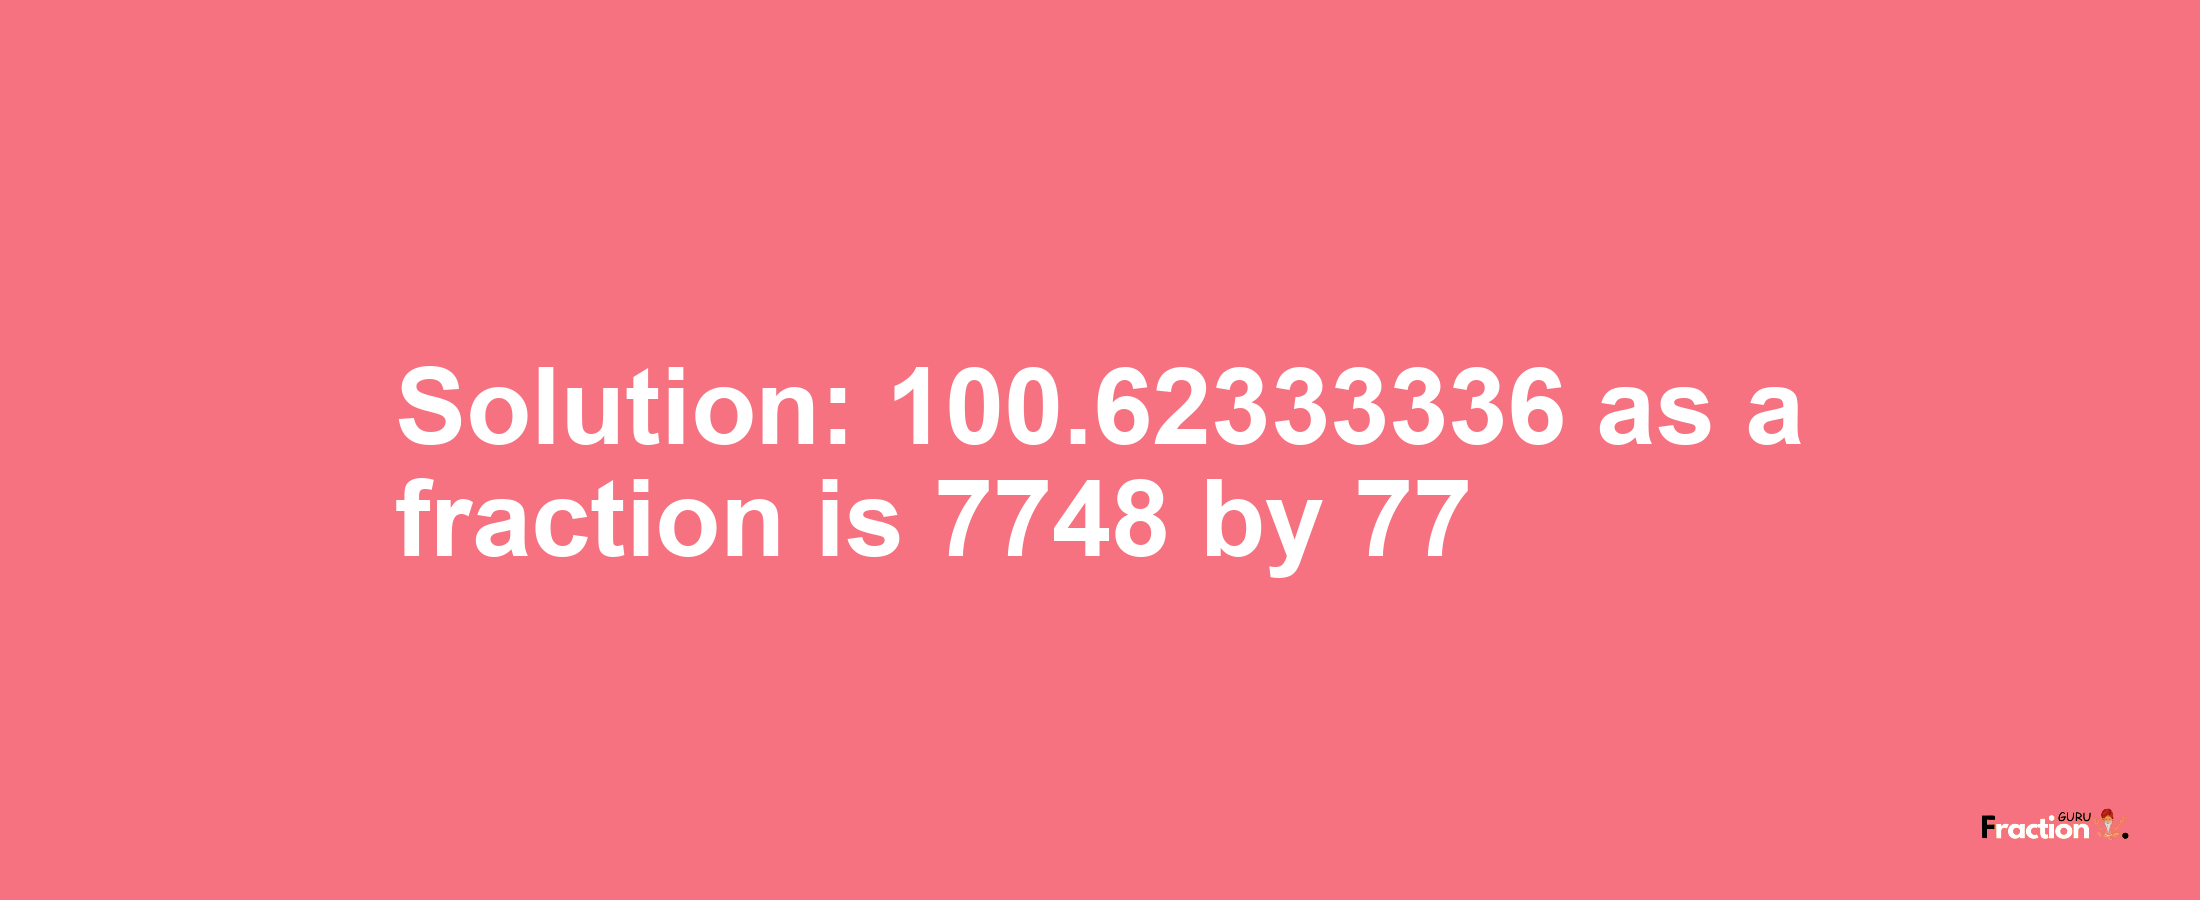 Solution:100.62333336 as a fraction is 7748/77